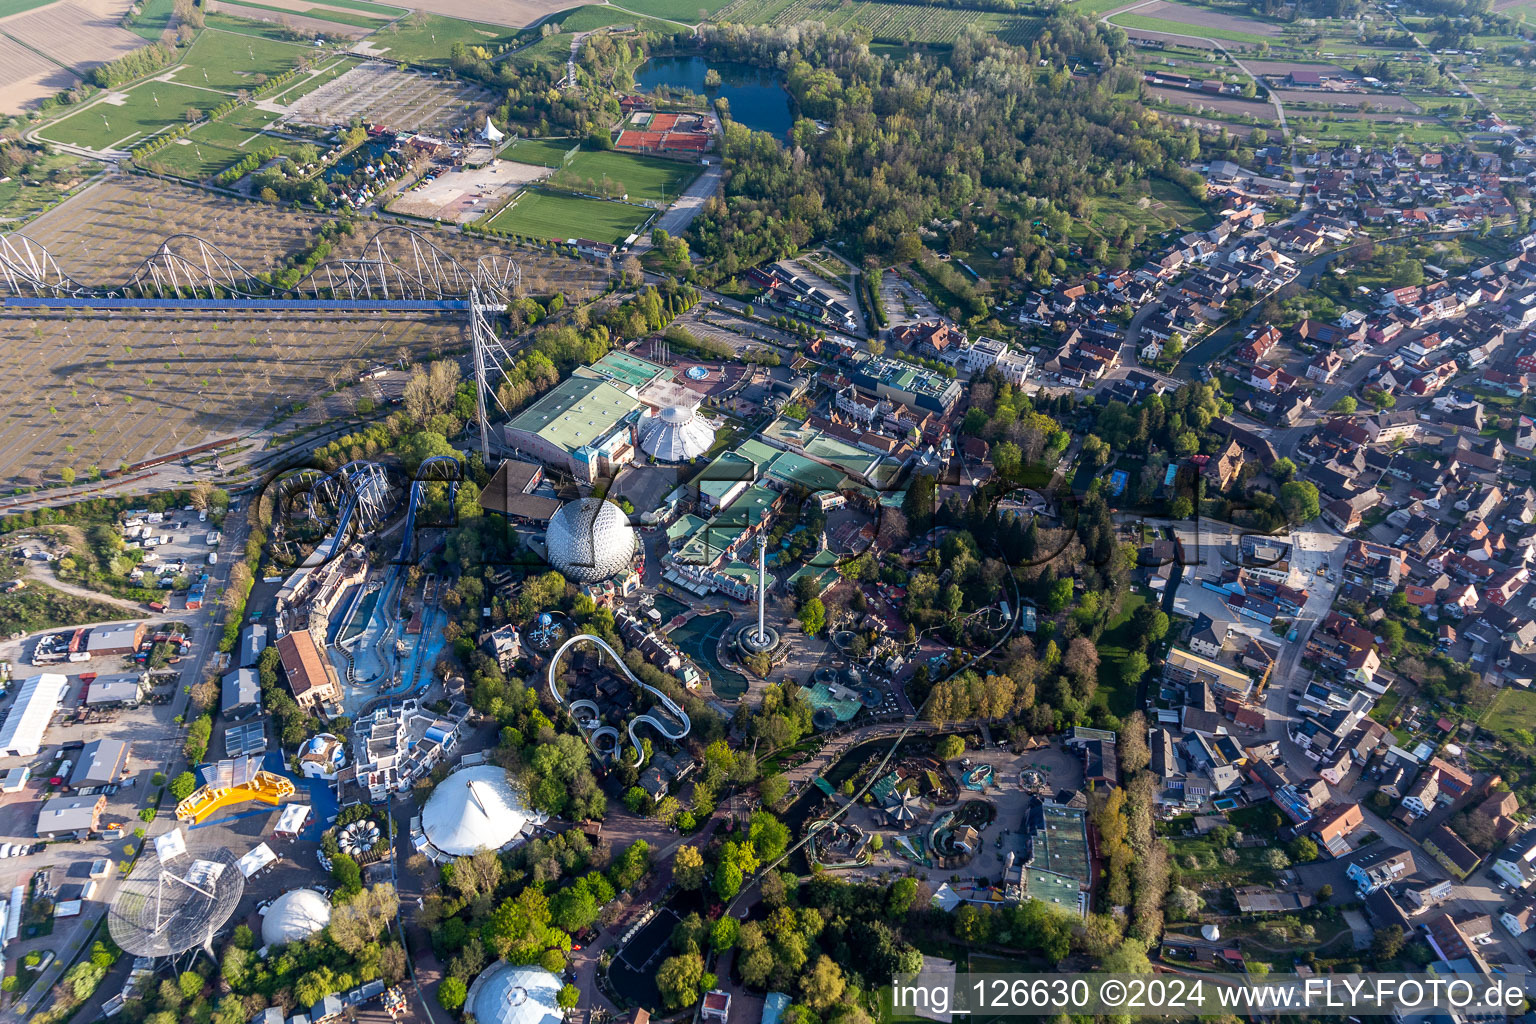 Aerial photograpy of Eurosat CanCan Coaster in the locked down Leisure-Park Europa Park in Rust in the state Baden-Wuerttemberg, Germany